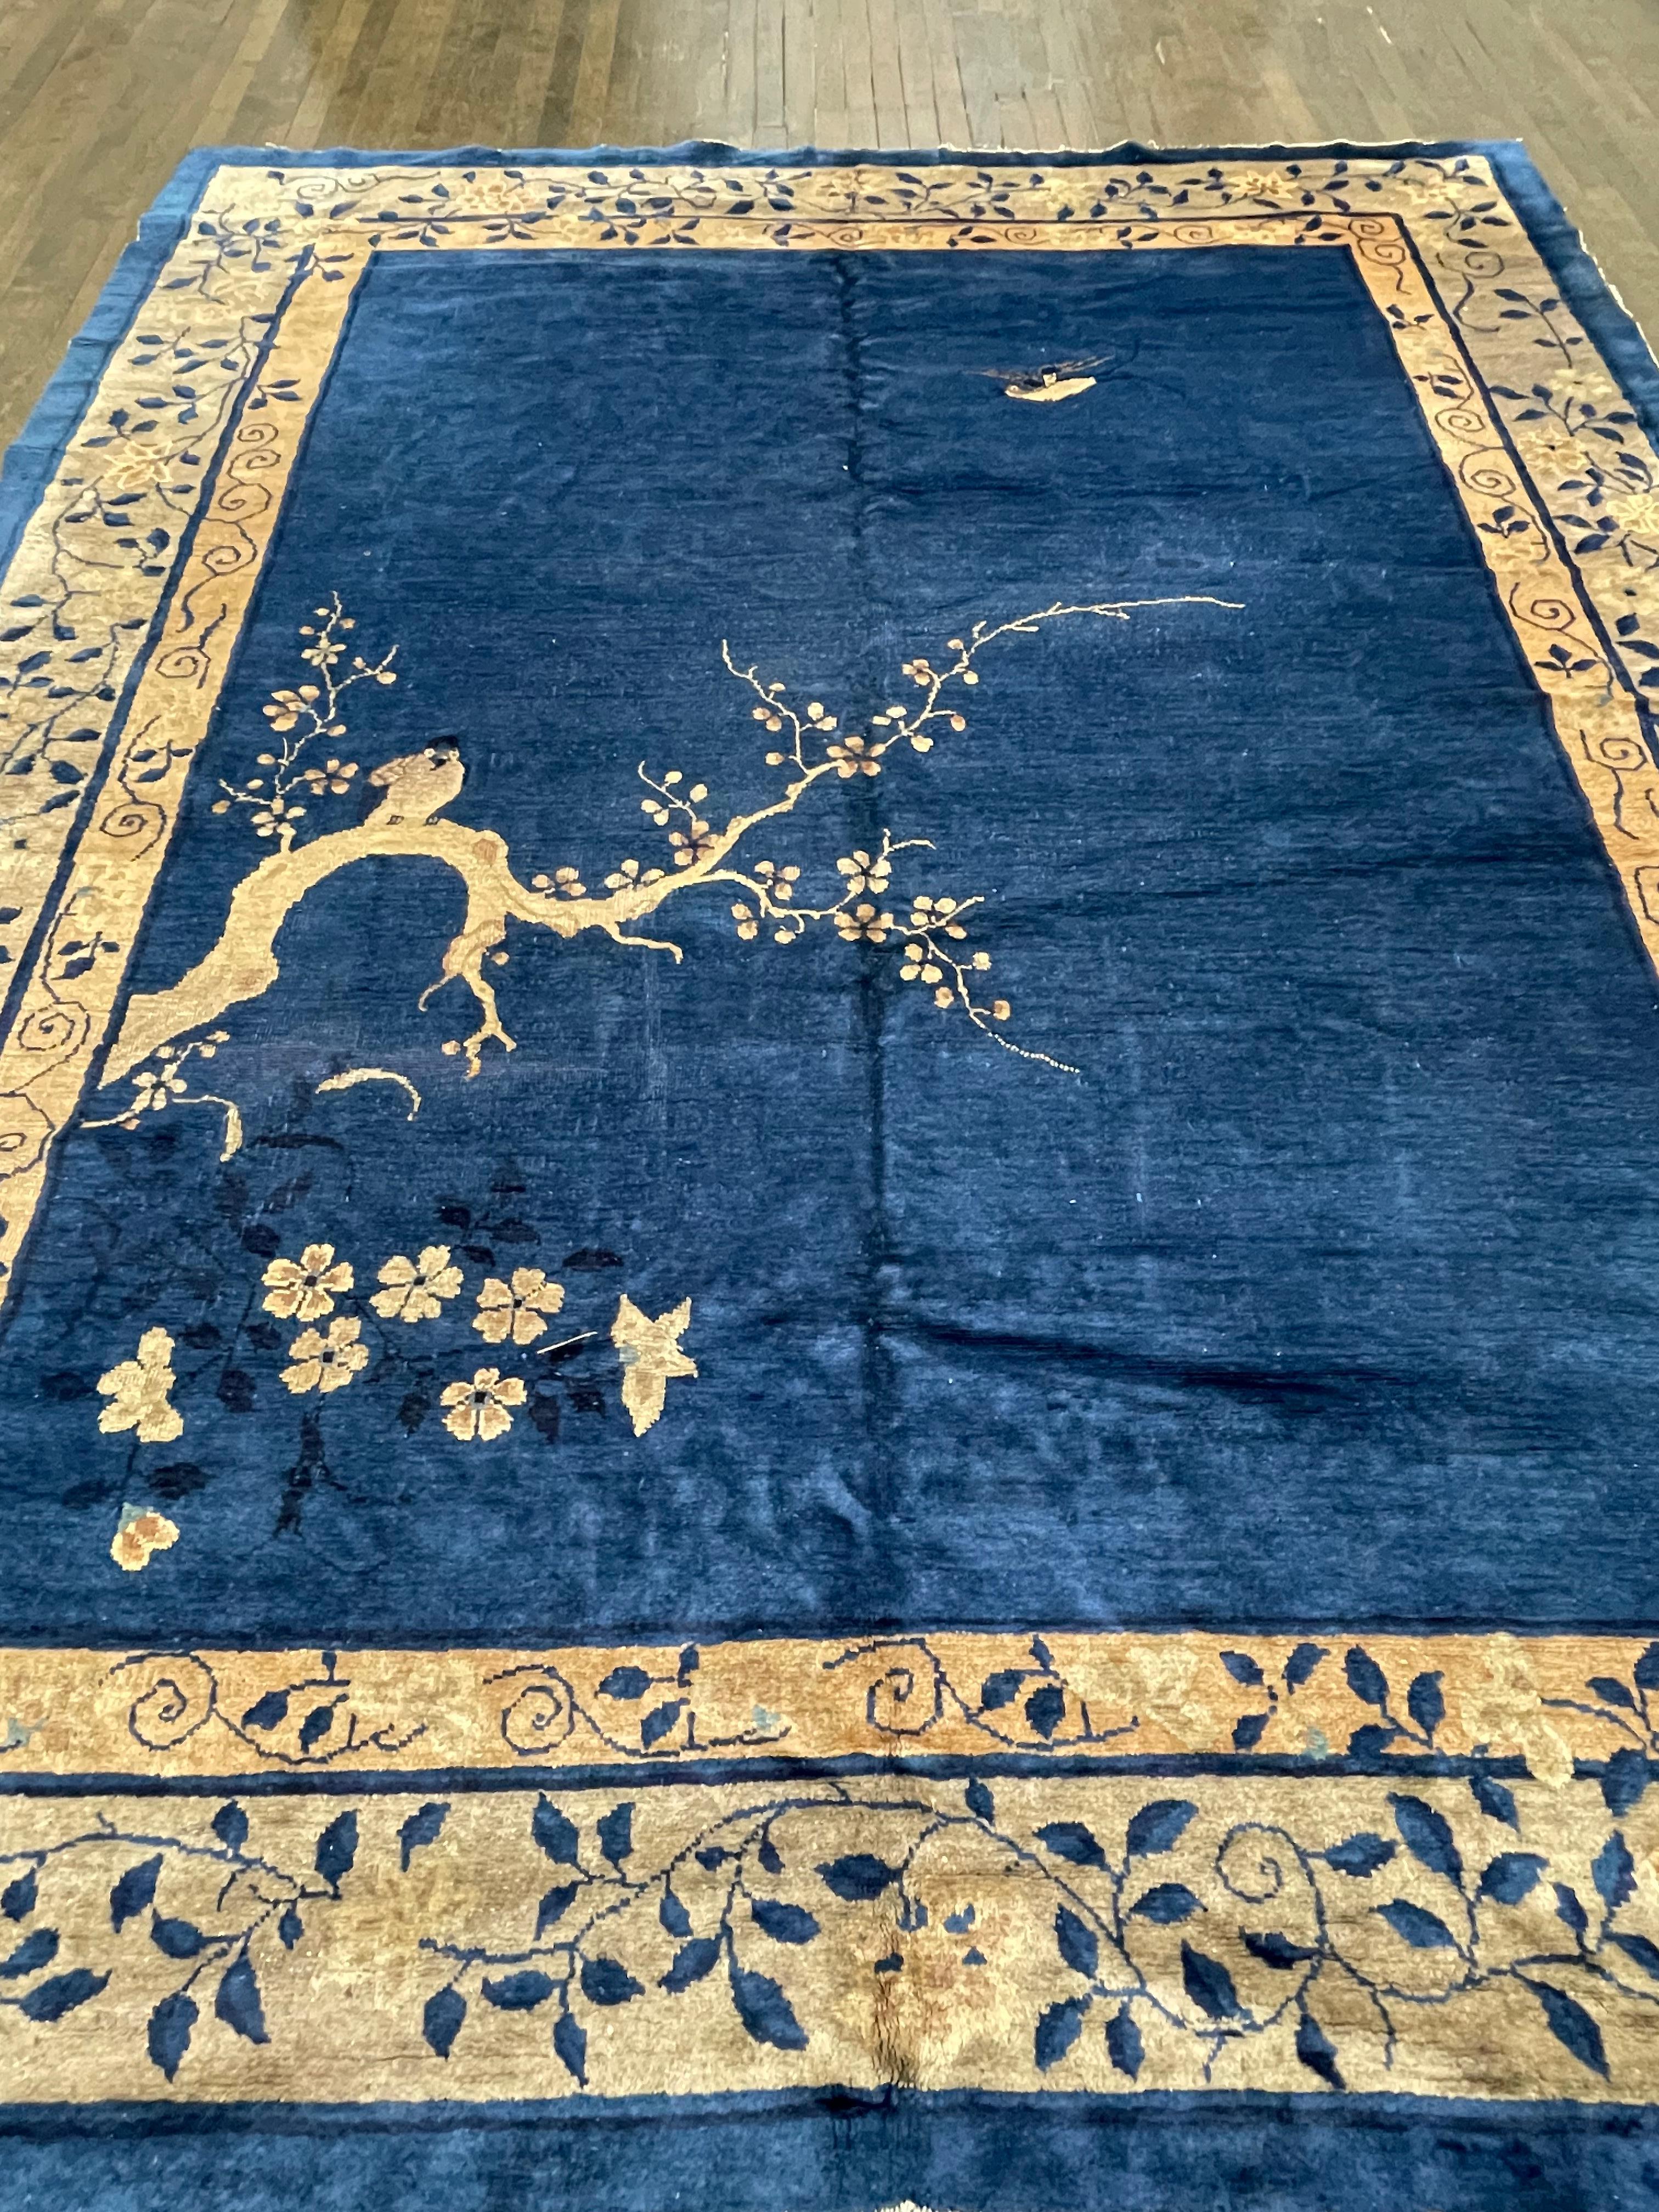 This very rare and unusual carpet is hand woven in China. A plain indigo blue decorated with a large tree, a Chinese symbol of knowledge and wisdom makes this carpet more like a painting that is woven for the floor. A true art for the floor, this